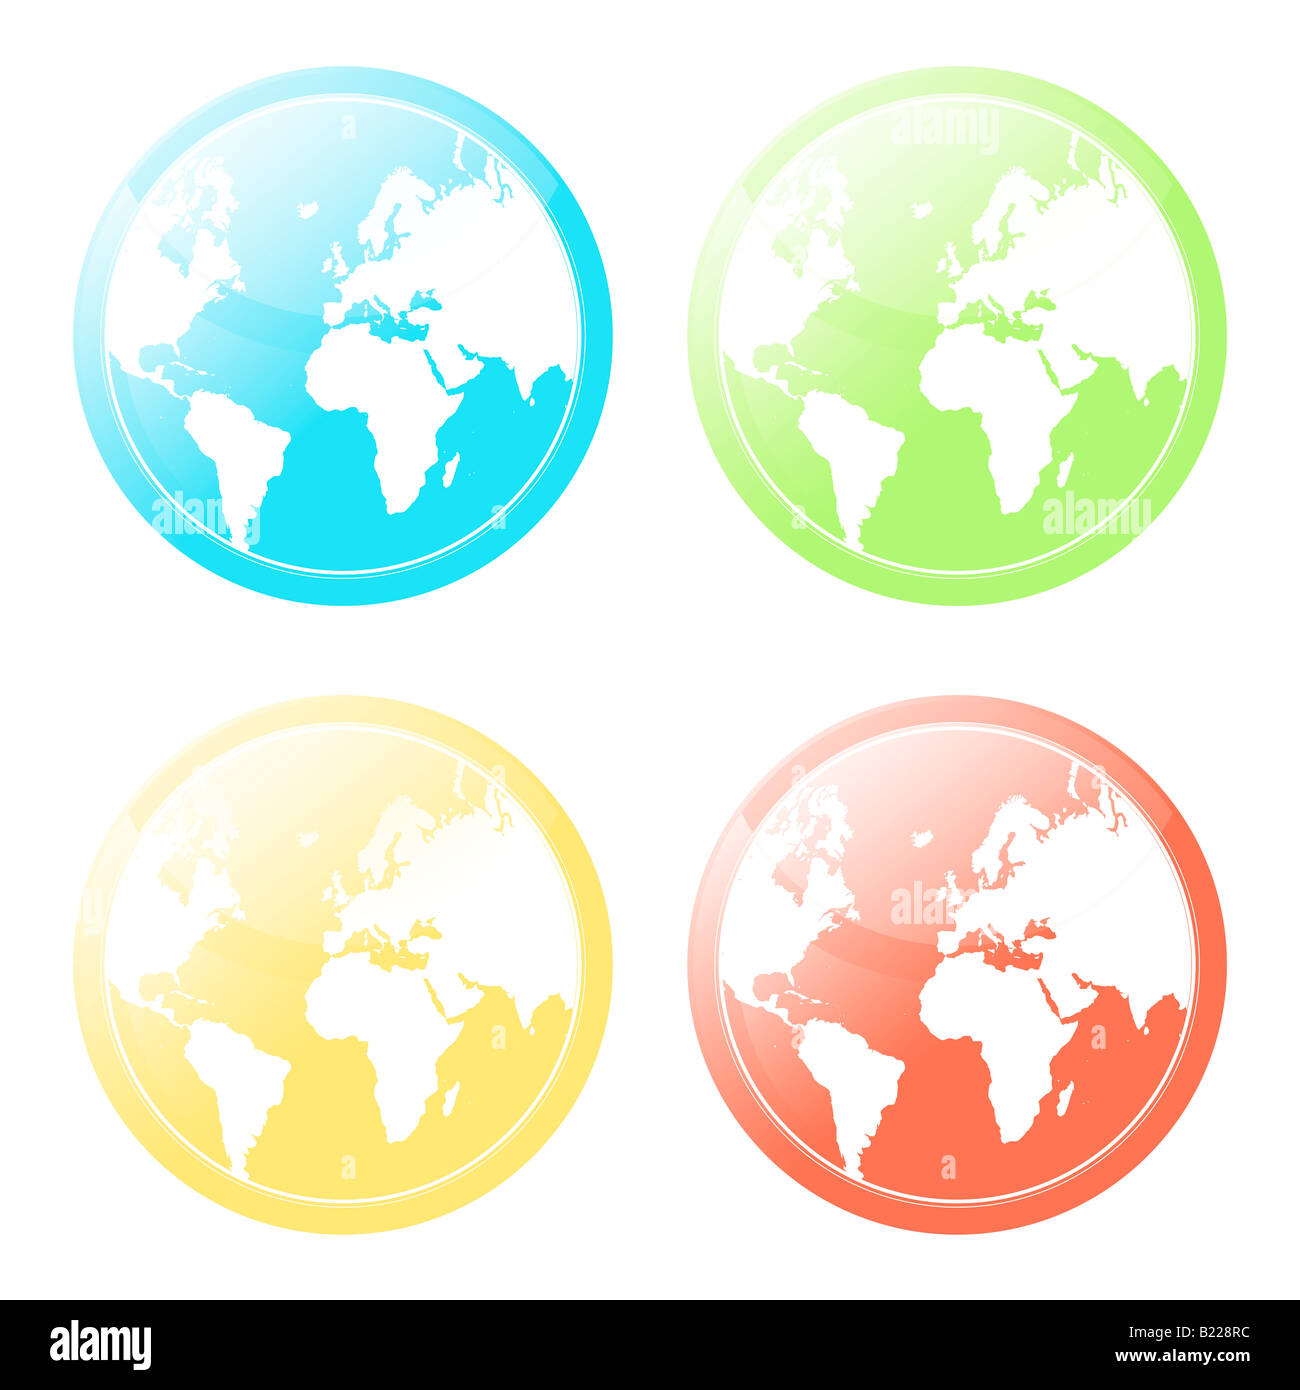 Vector illustration of four differently colored world map glossy modern icons Stock Photo